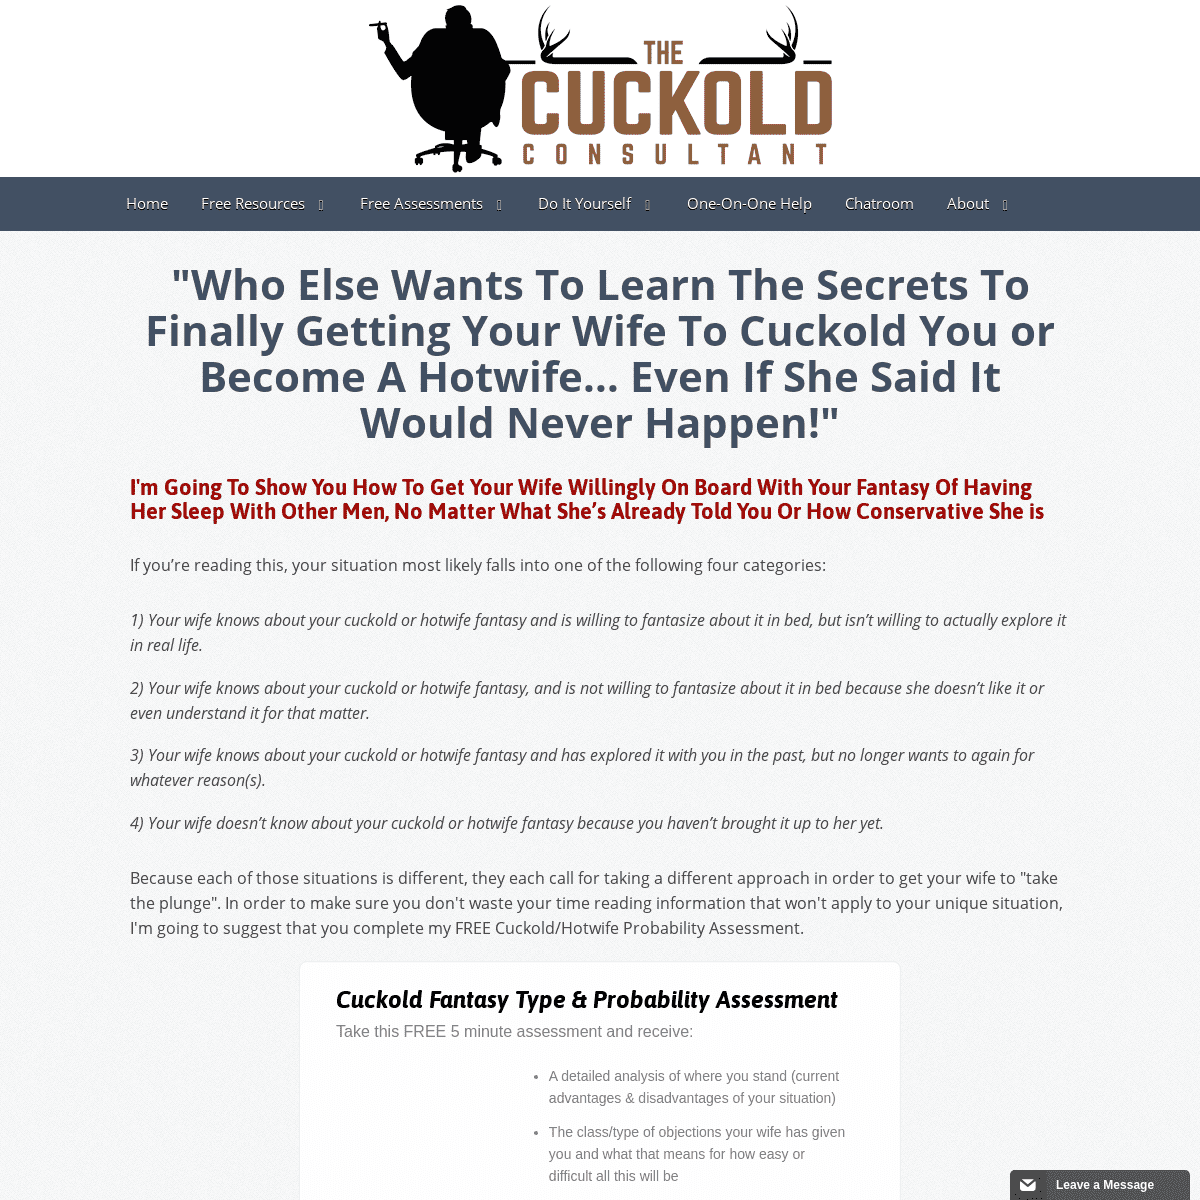 A complete backup of thecuckoldconsultant.com